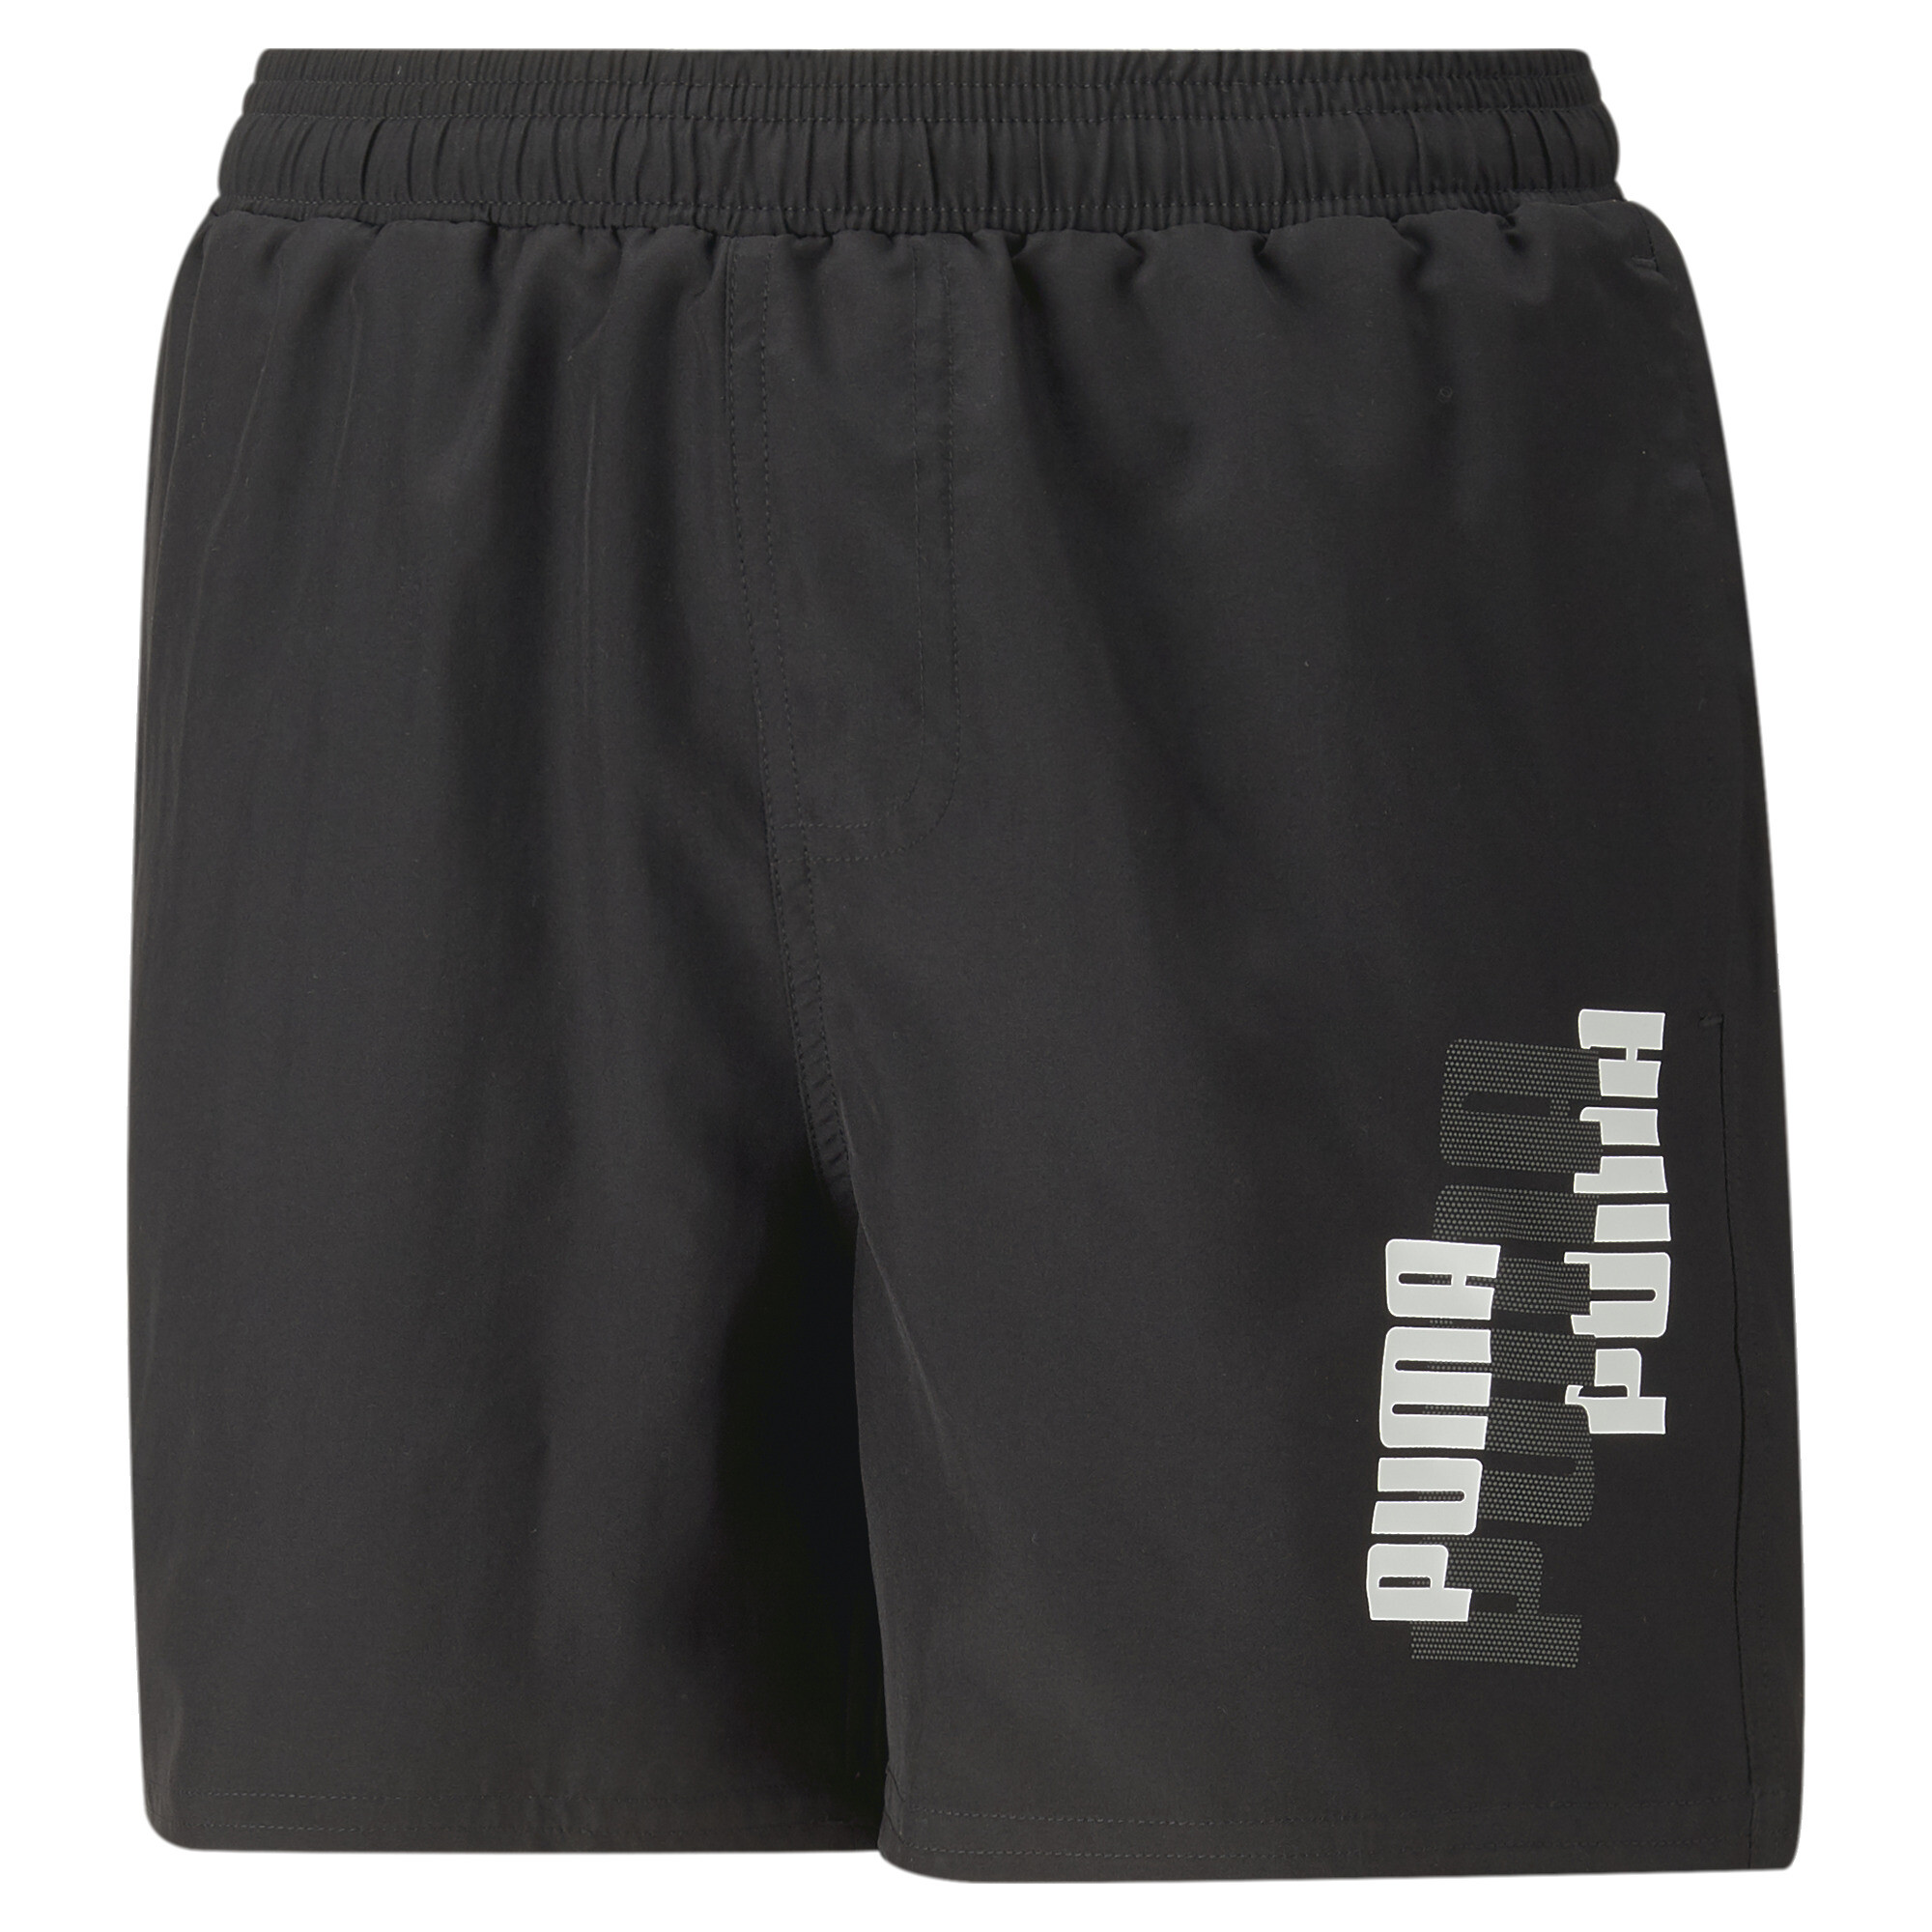 PUMA Essentials+ Logolab Woven Shorts In Black, Size 15-16 Youth